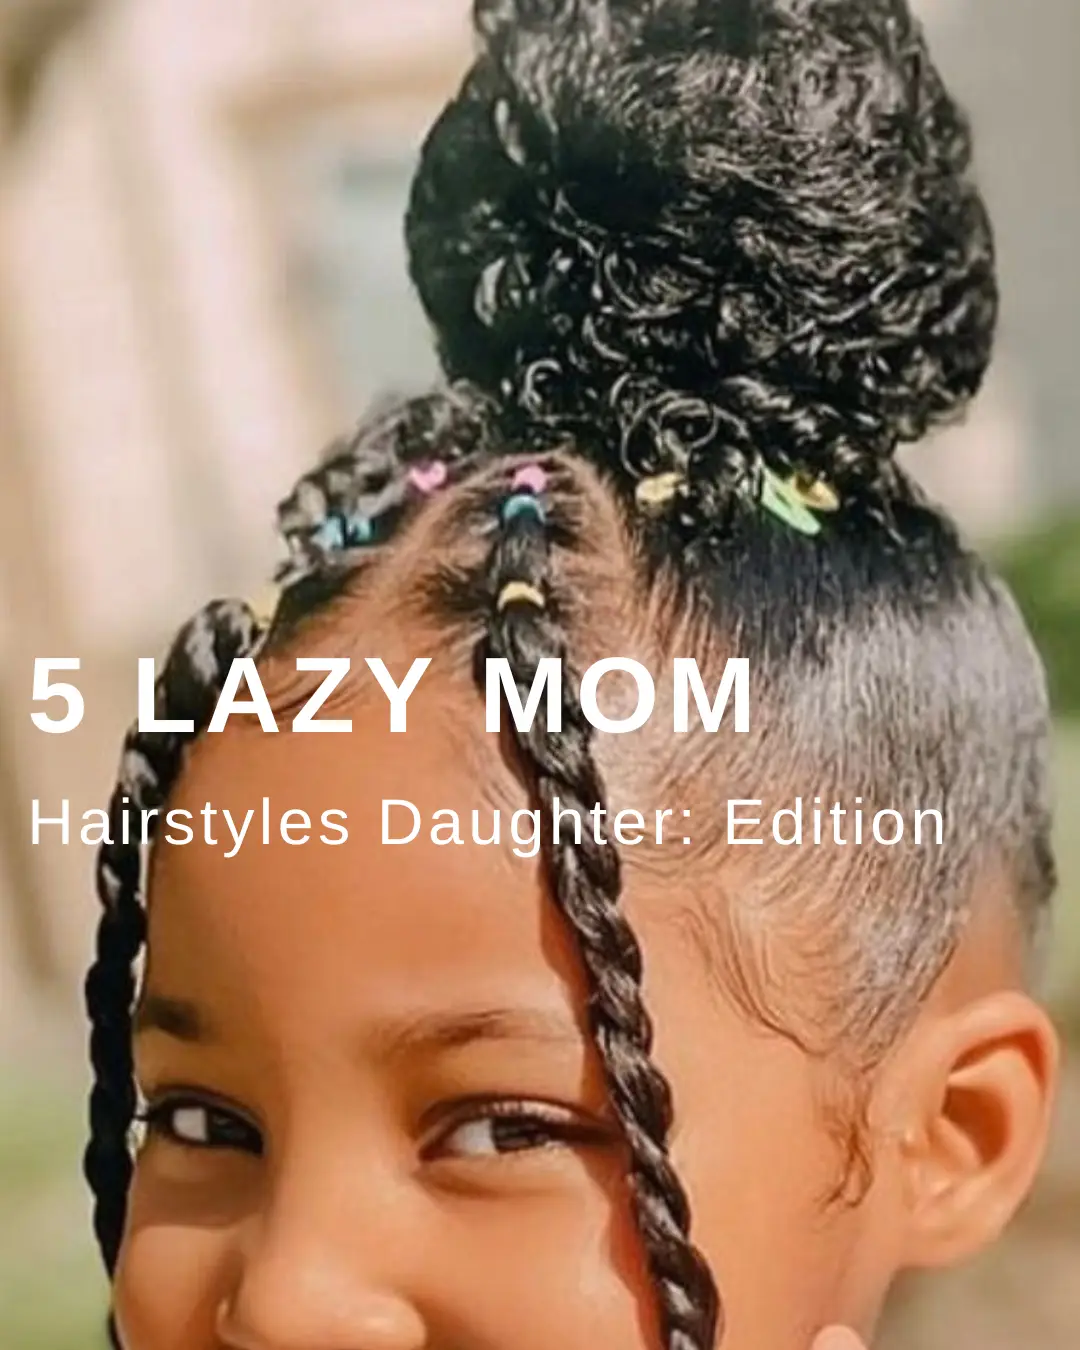 Braid Styles For Kids: 20 Cool & Creative Styles For Her Hair